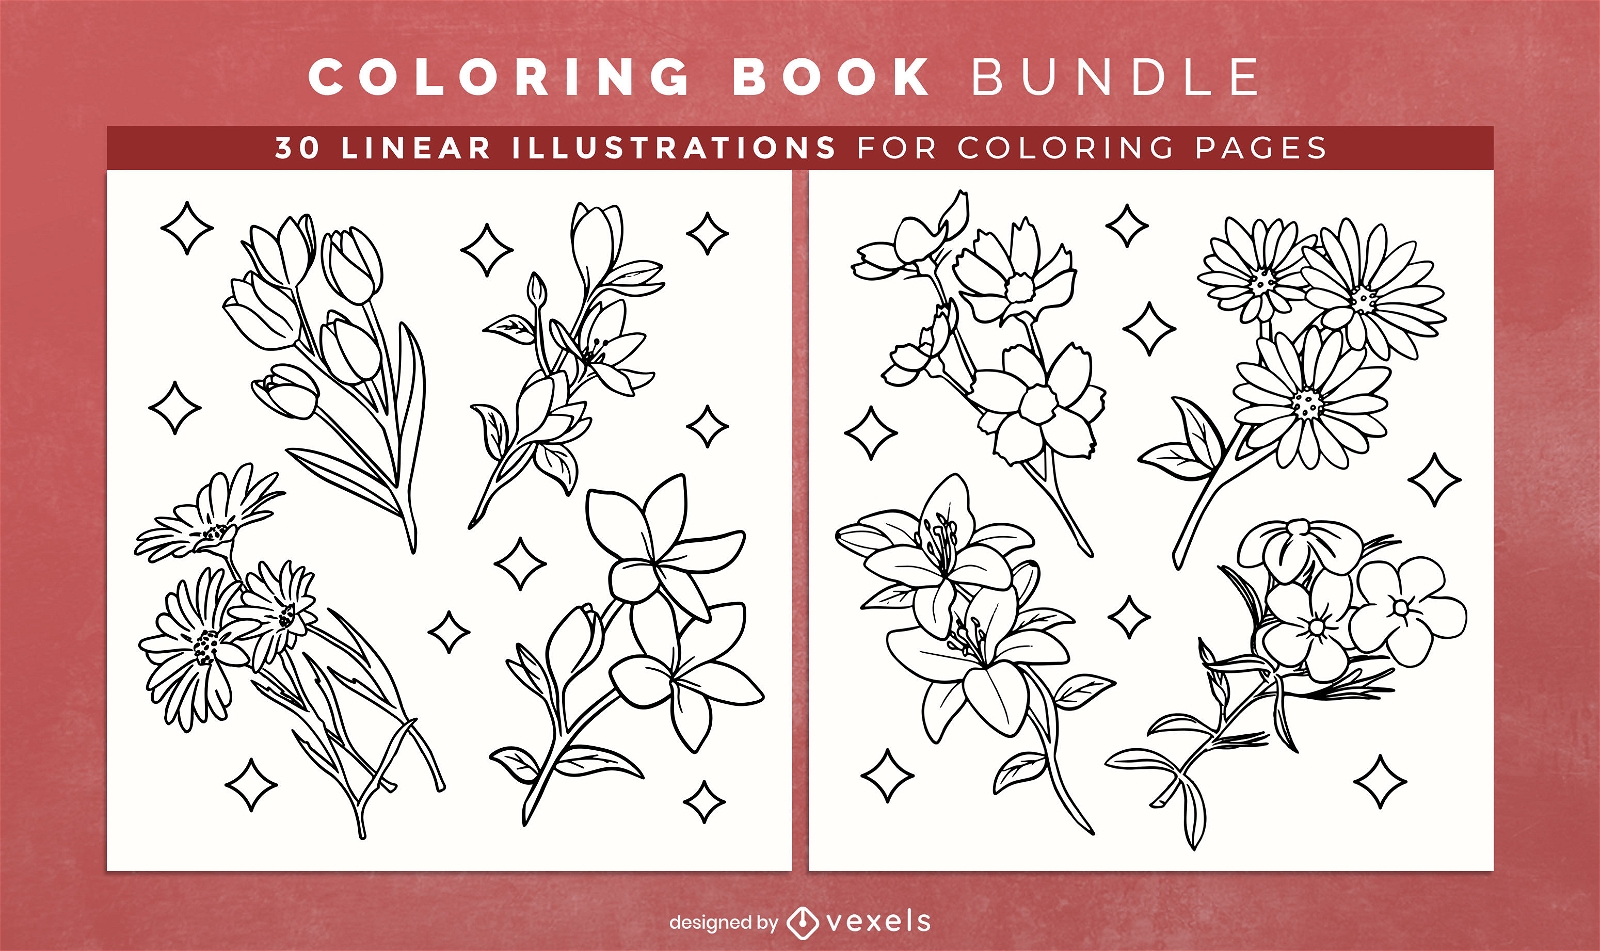 Sparkling flowers coloring book pages design